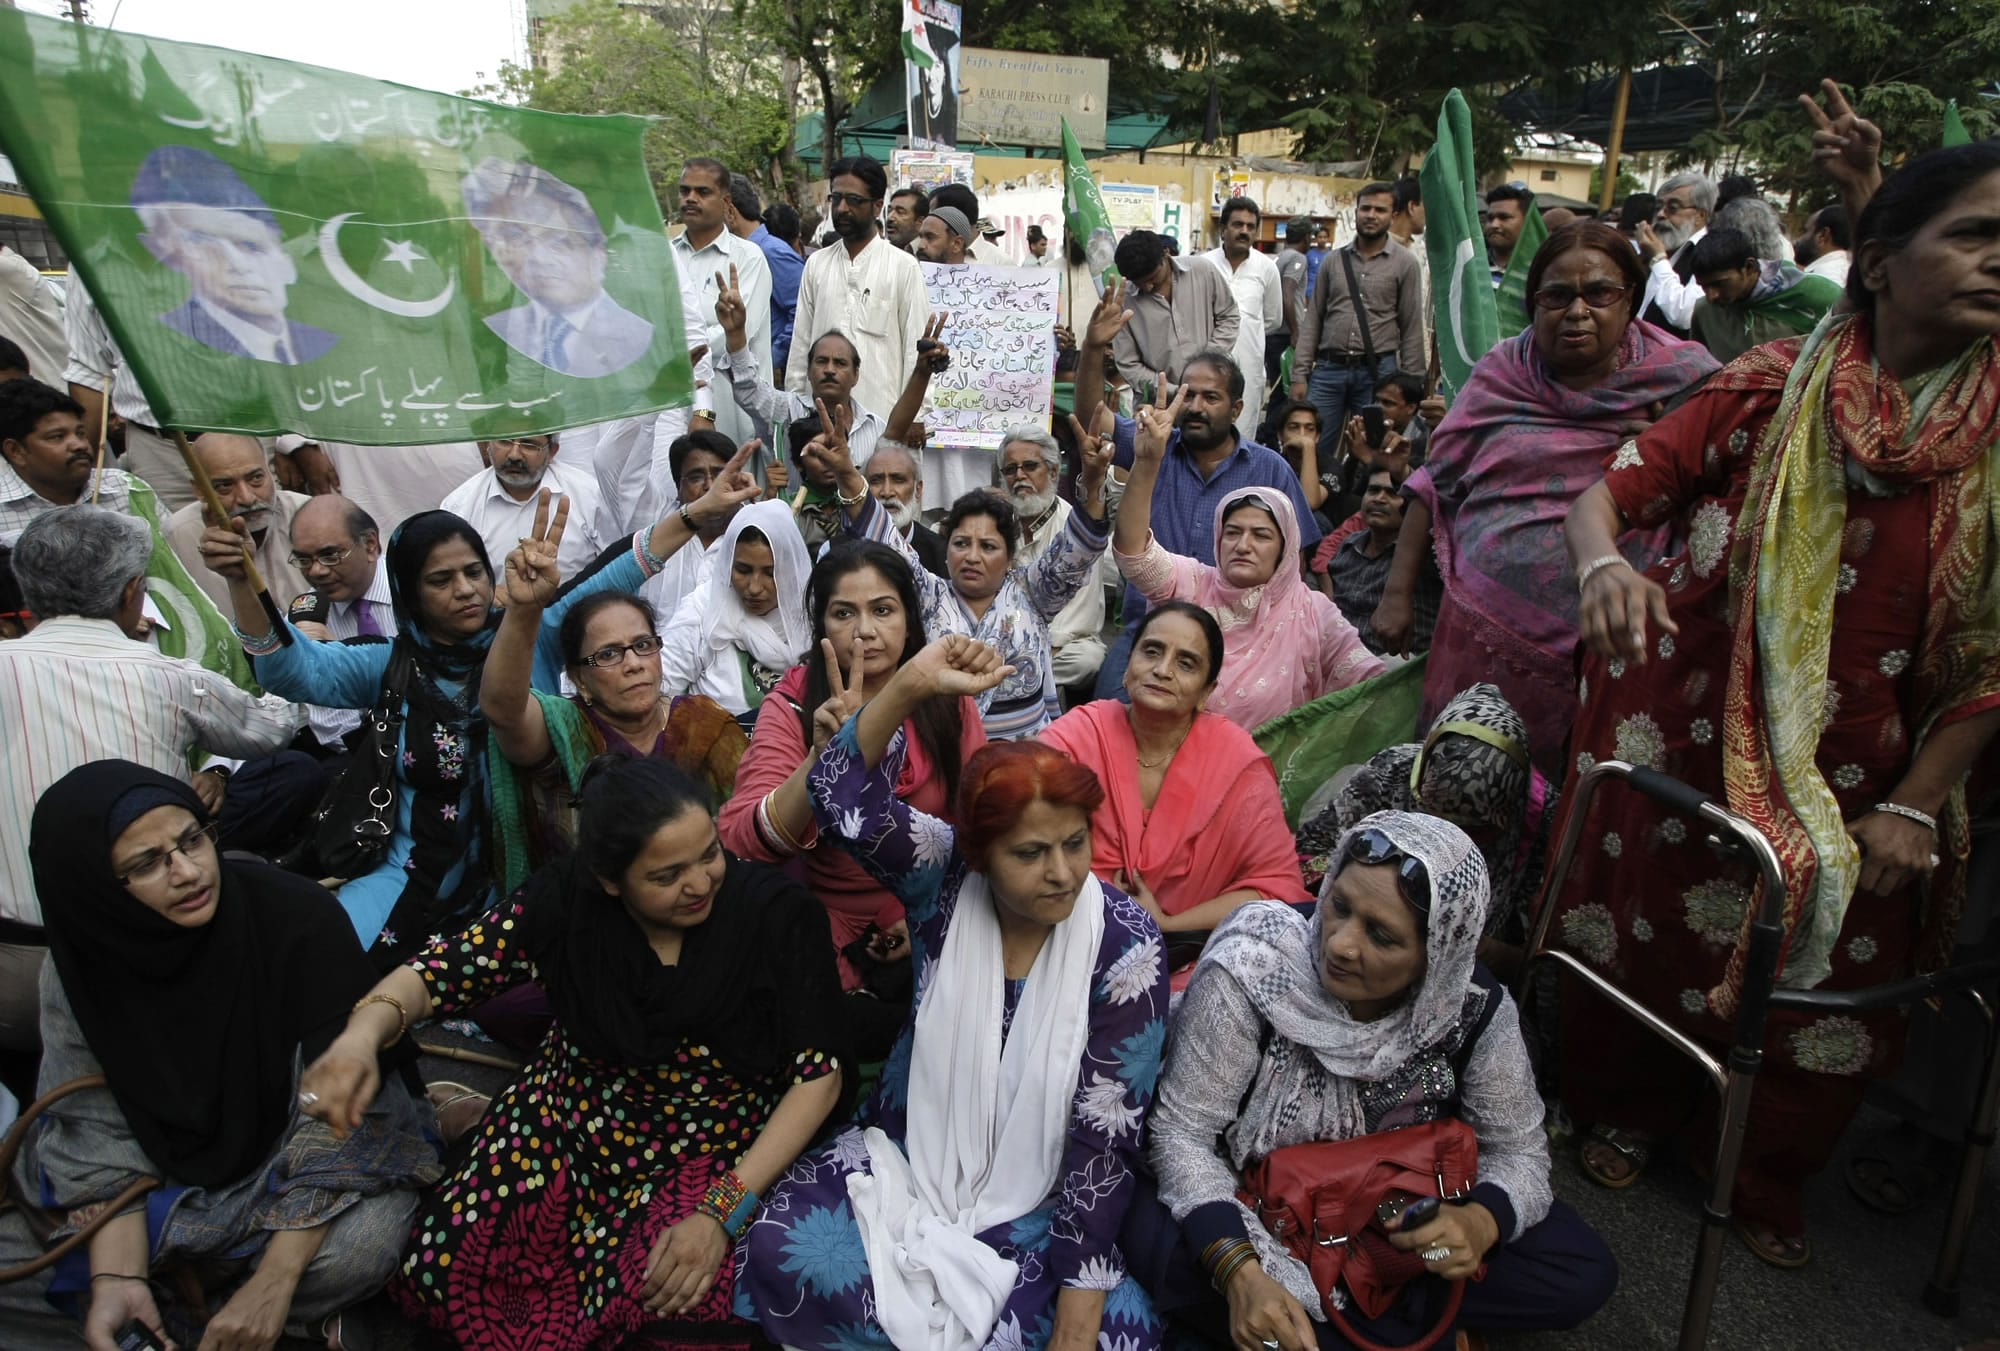 Supporters of Pakistan's former President and military ruler Pervez Musharraf rally against the court decision in Karachi, Pakistan on Thursday.